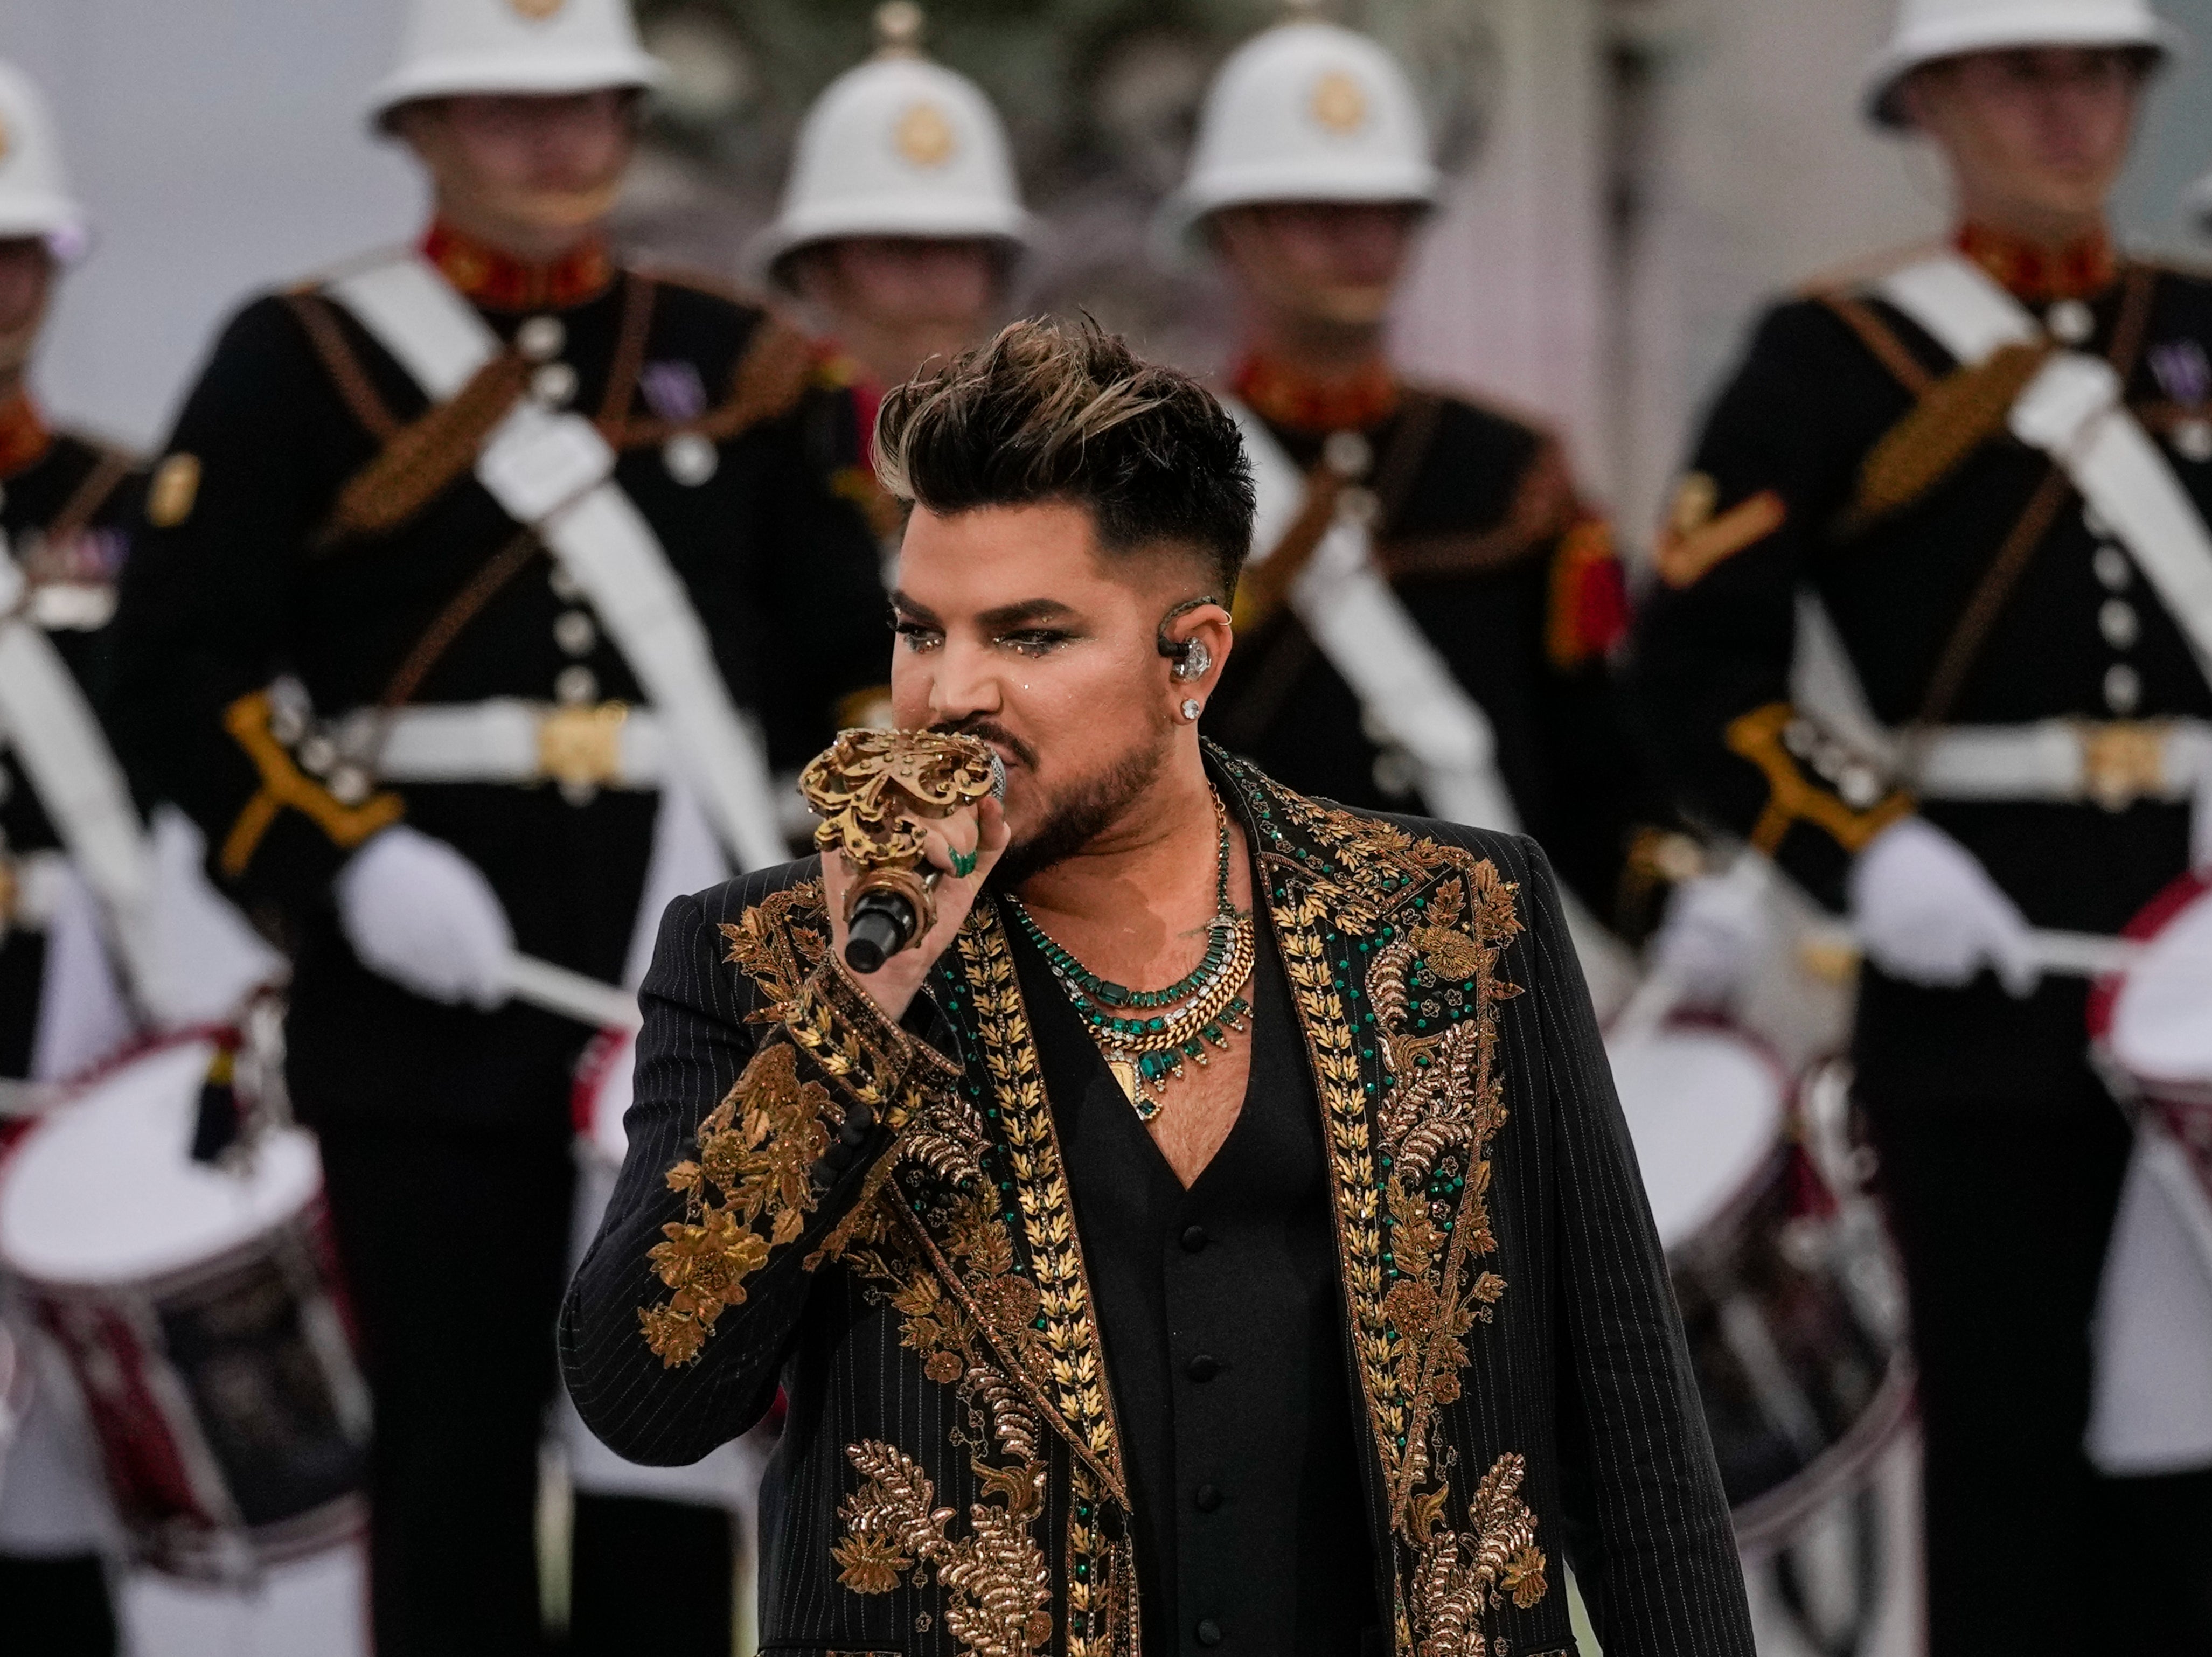 Adam Lambert and Queen opening the jubilee concert with a performance of ‘We Will Rock You’